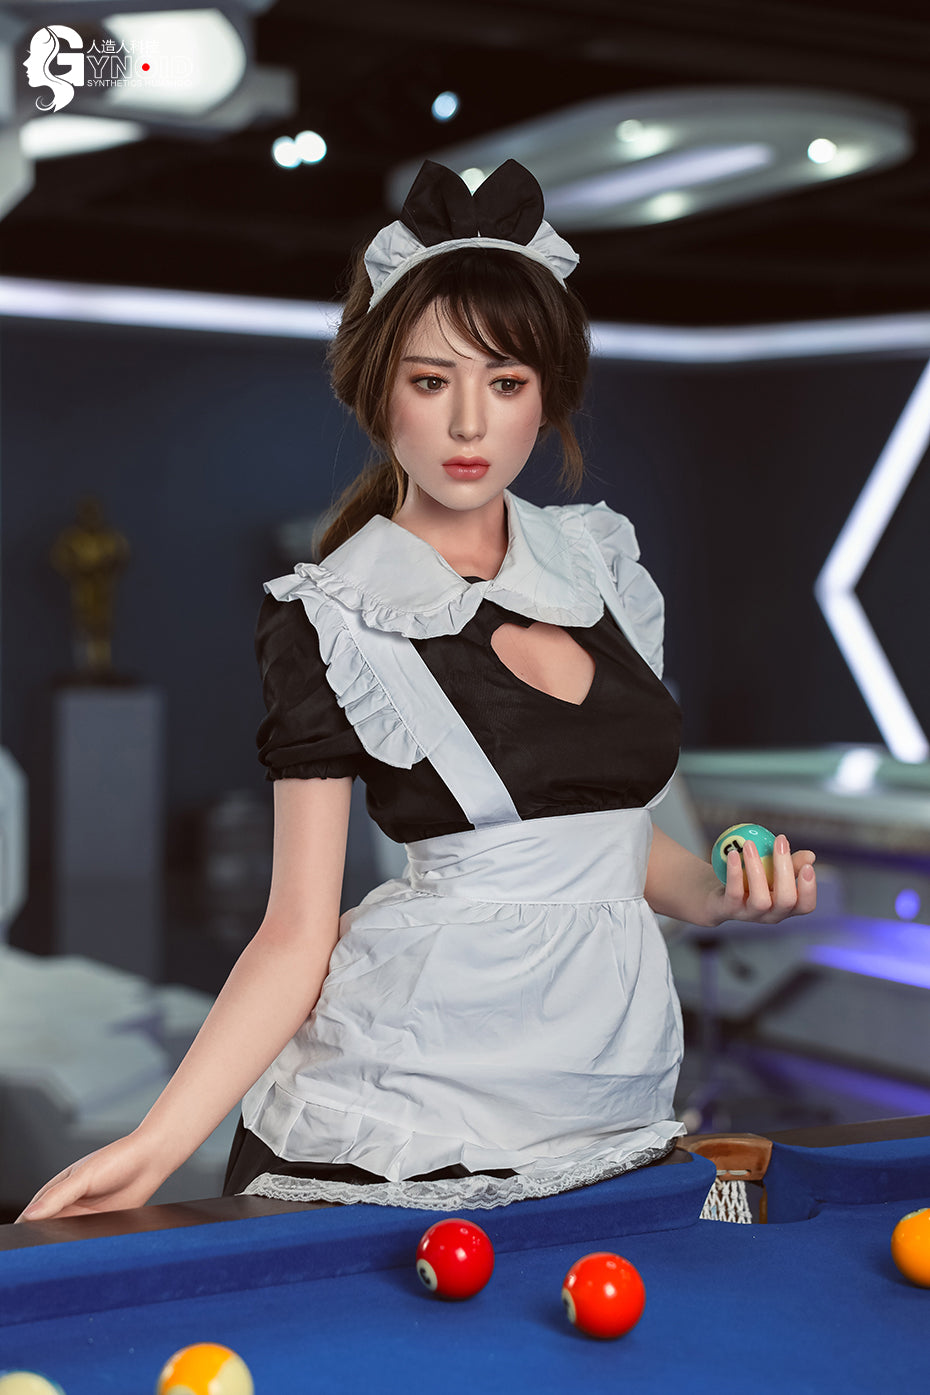 Gynoid Doll 170 cm Silicone - Lisa | Buy Sex Dolls at DOLLS ACTUALLY